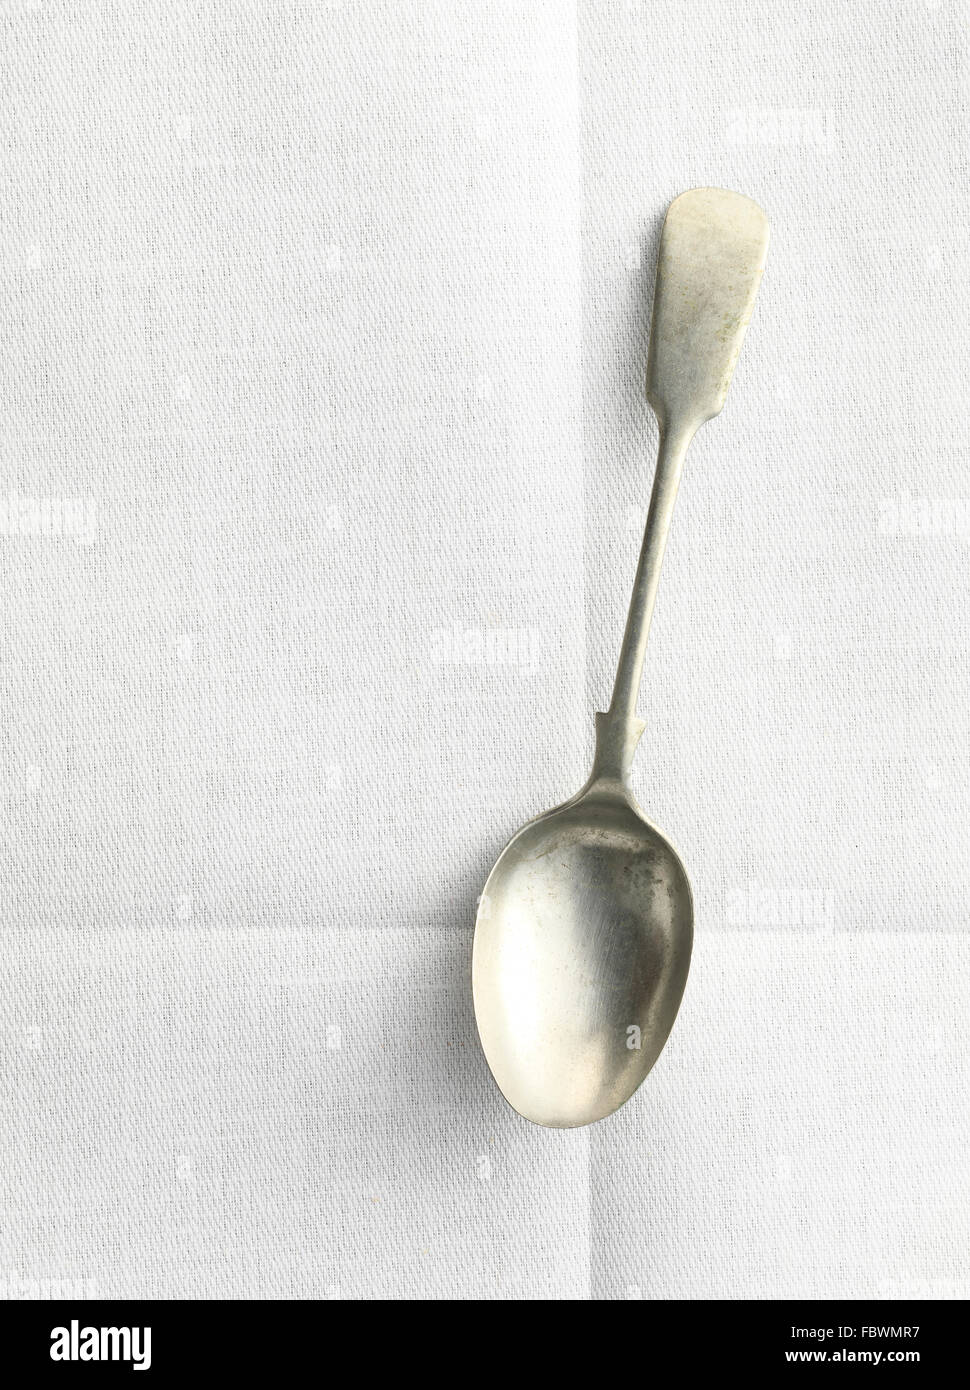 old spoon on linen table cloth with creases Stock Photo